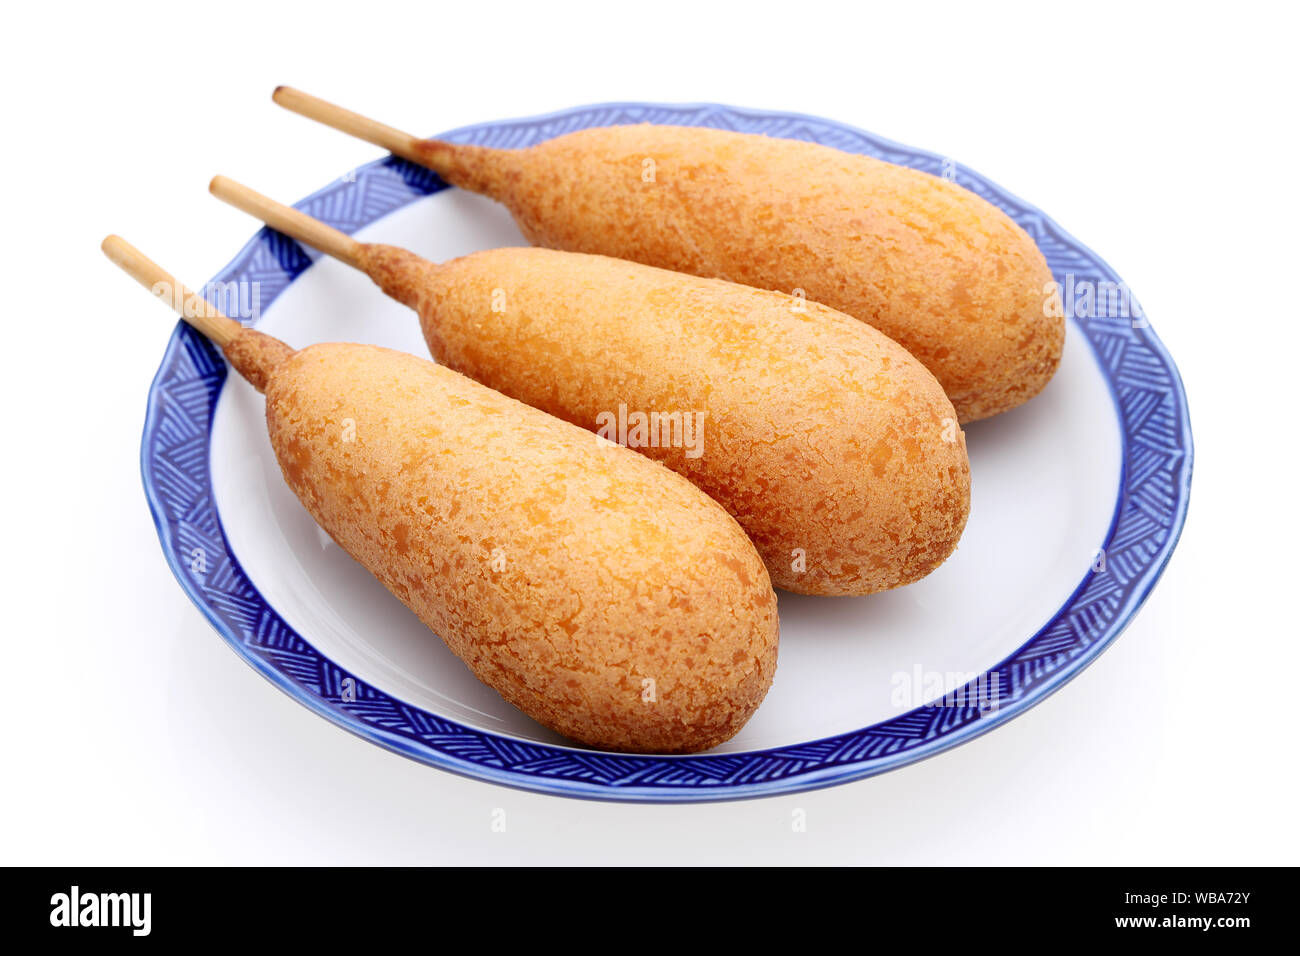 Corn dogs on a plate. This food is called American dog all over Japan. Stock Photo